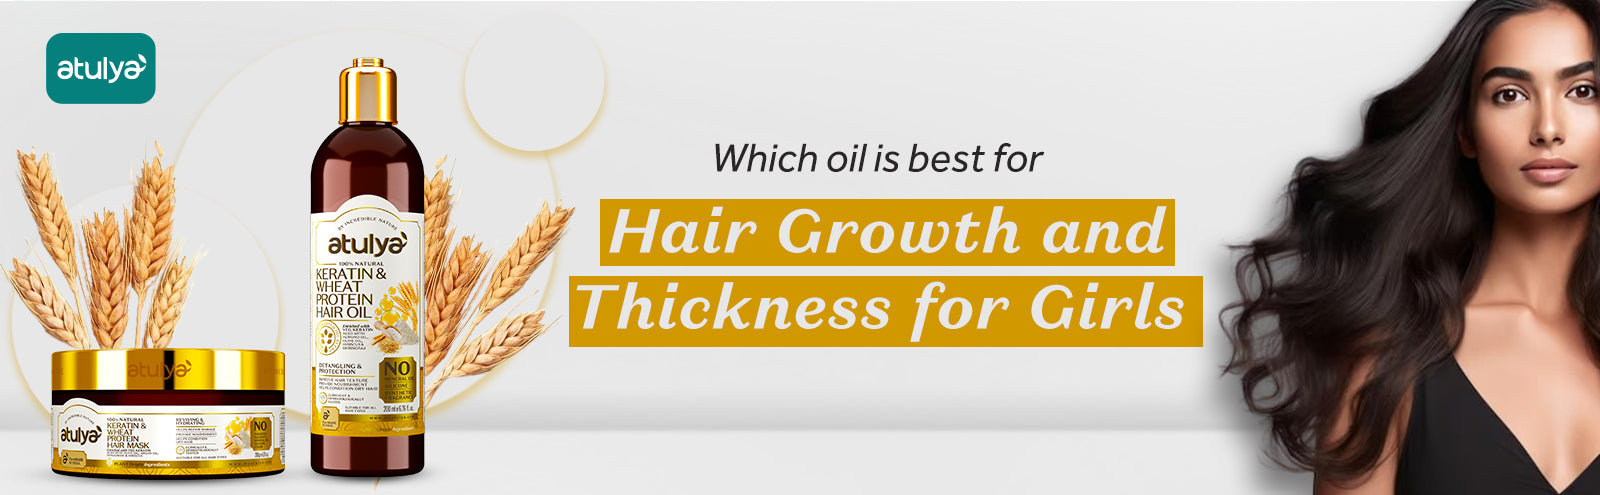 Which oil is best for hair growth and thickness for girls